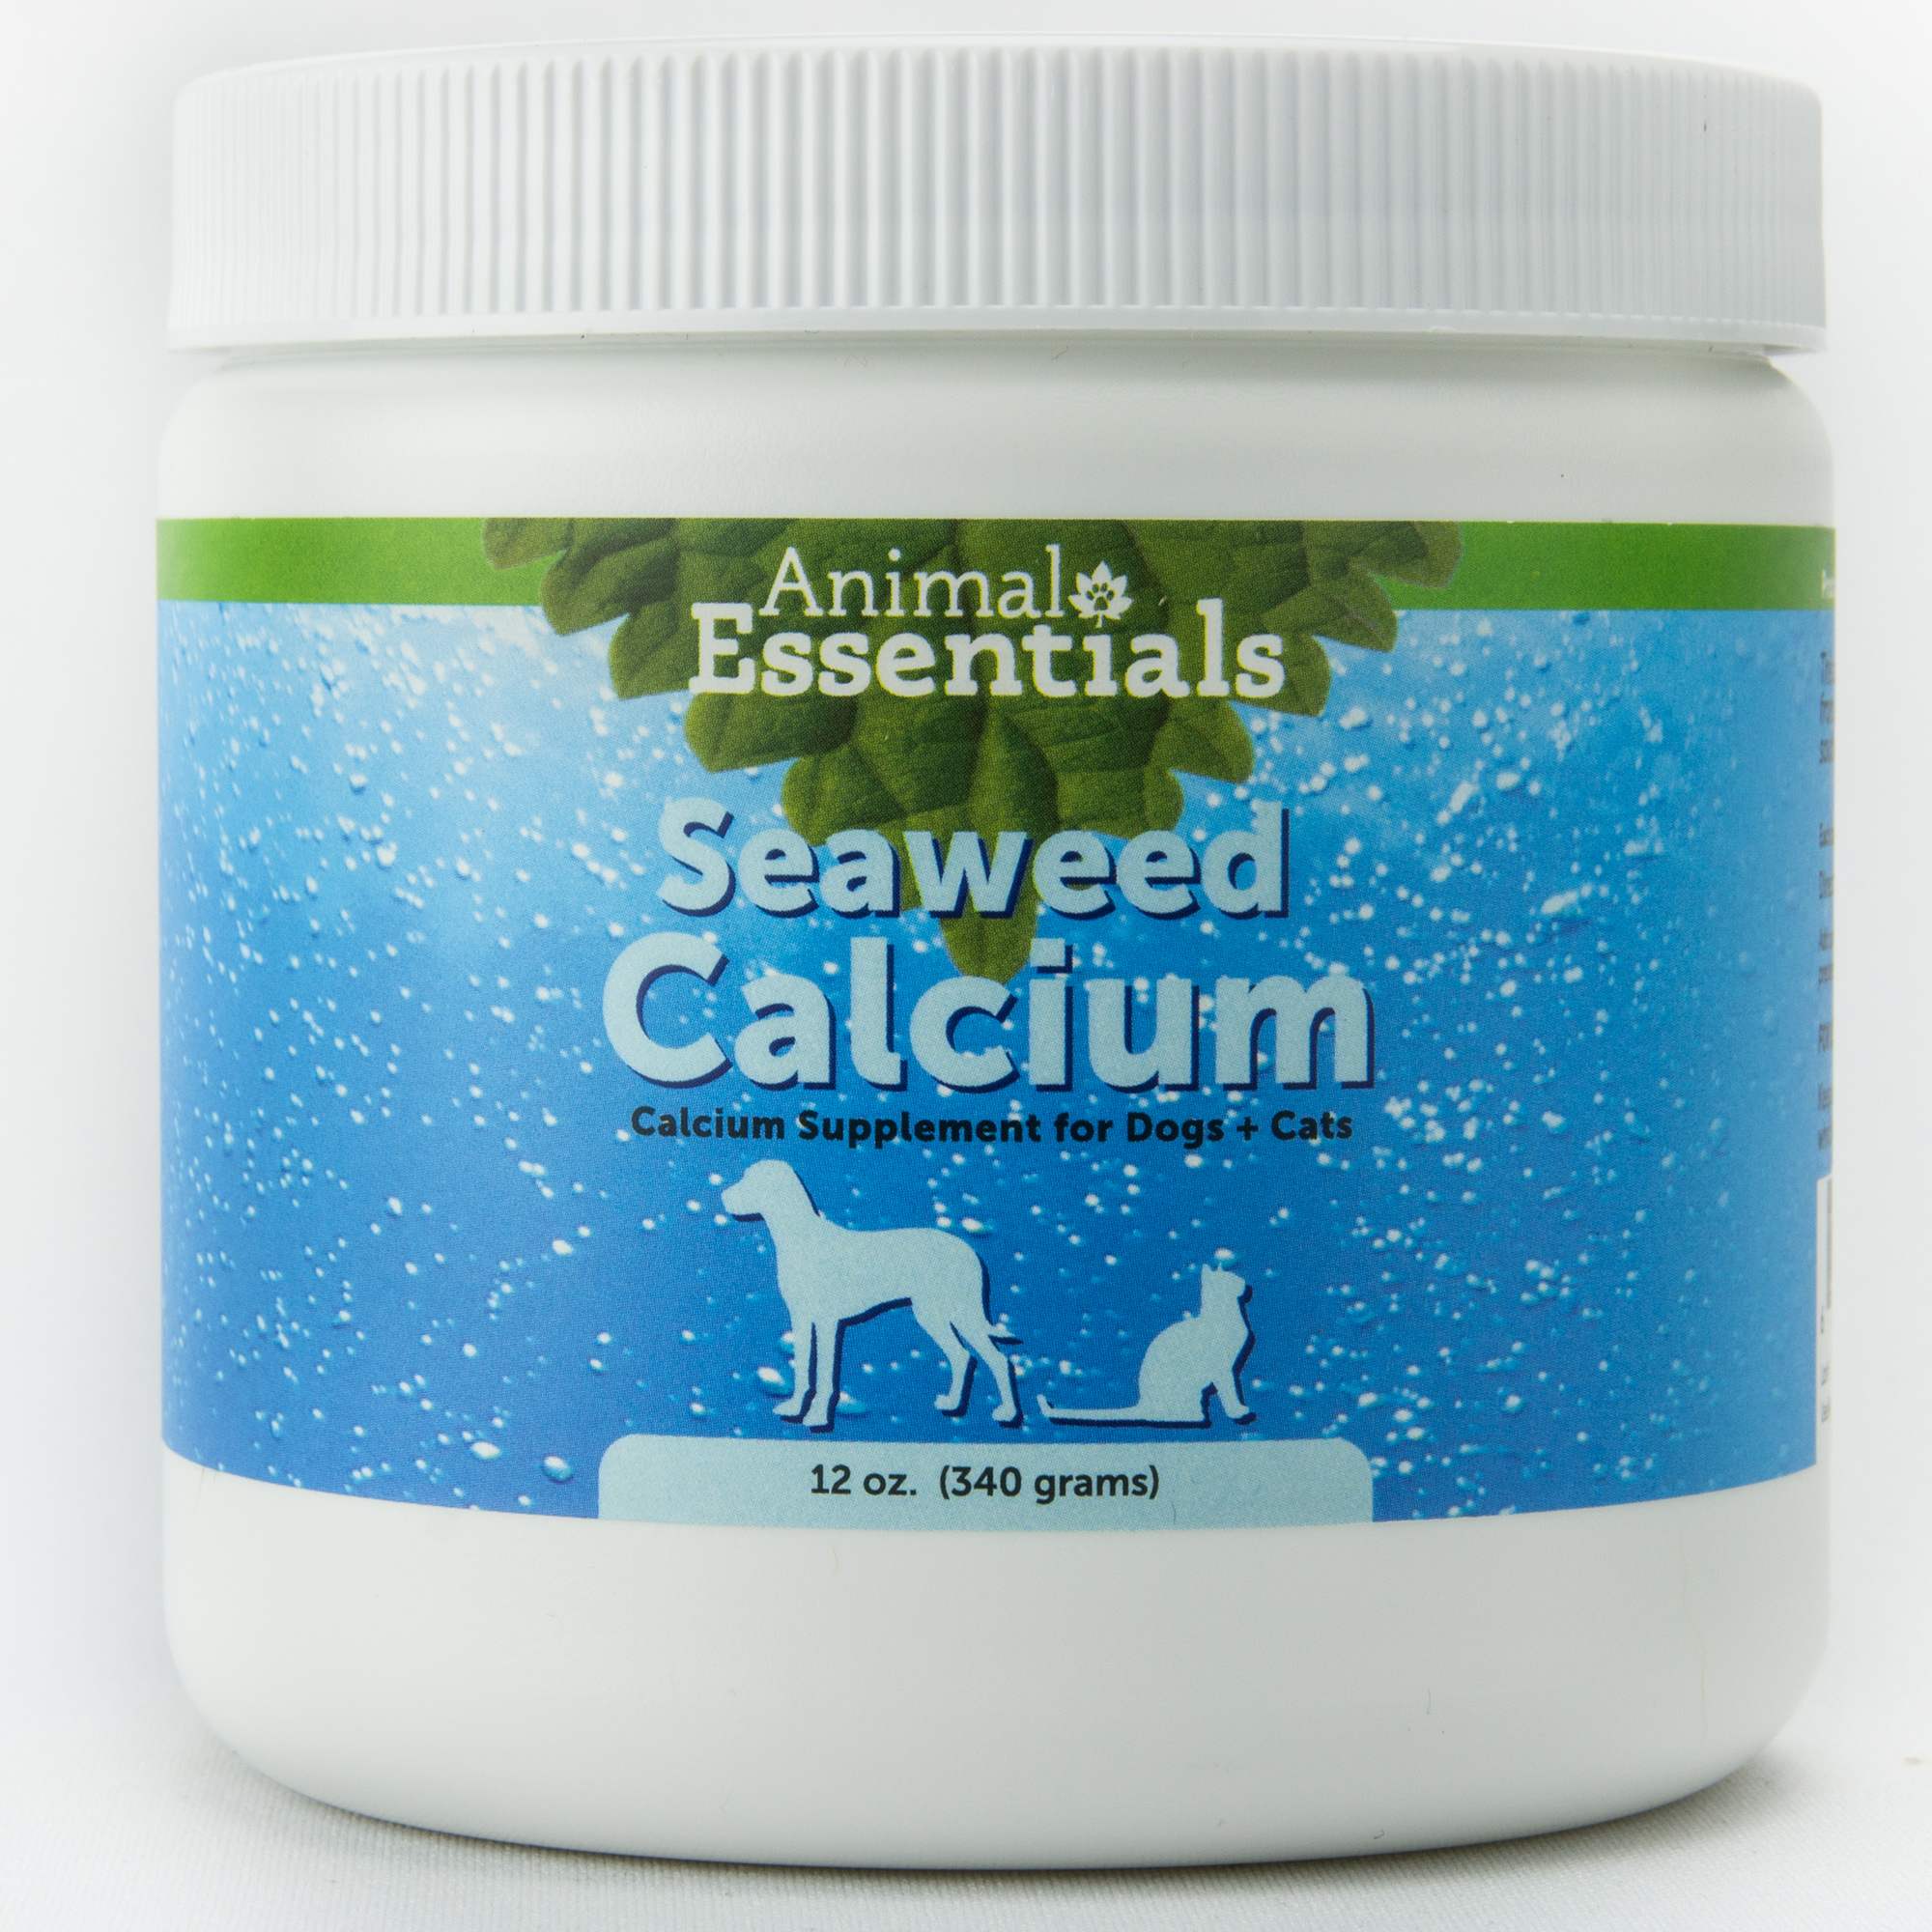 Animal Essentials Seaweed Calcium for Dogs and Cats